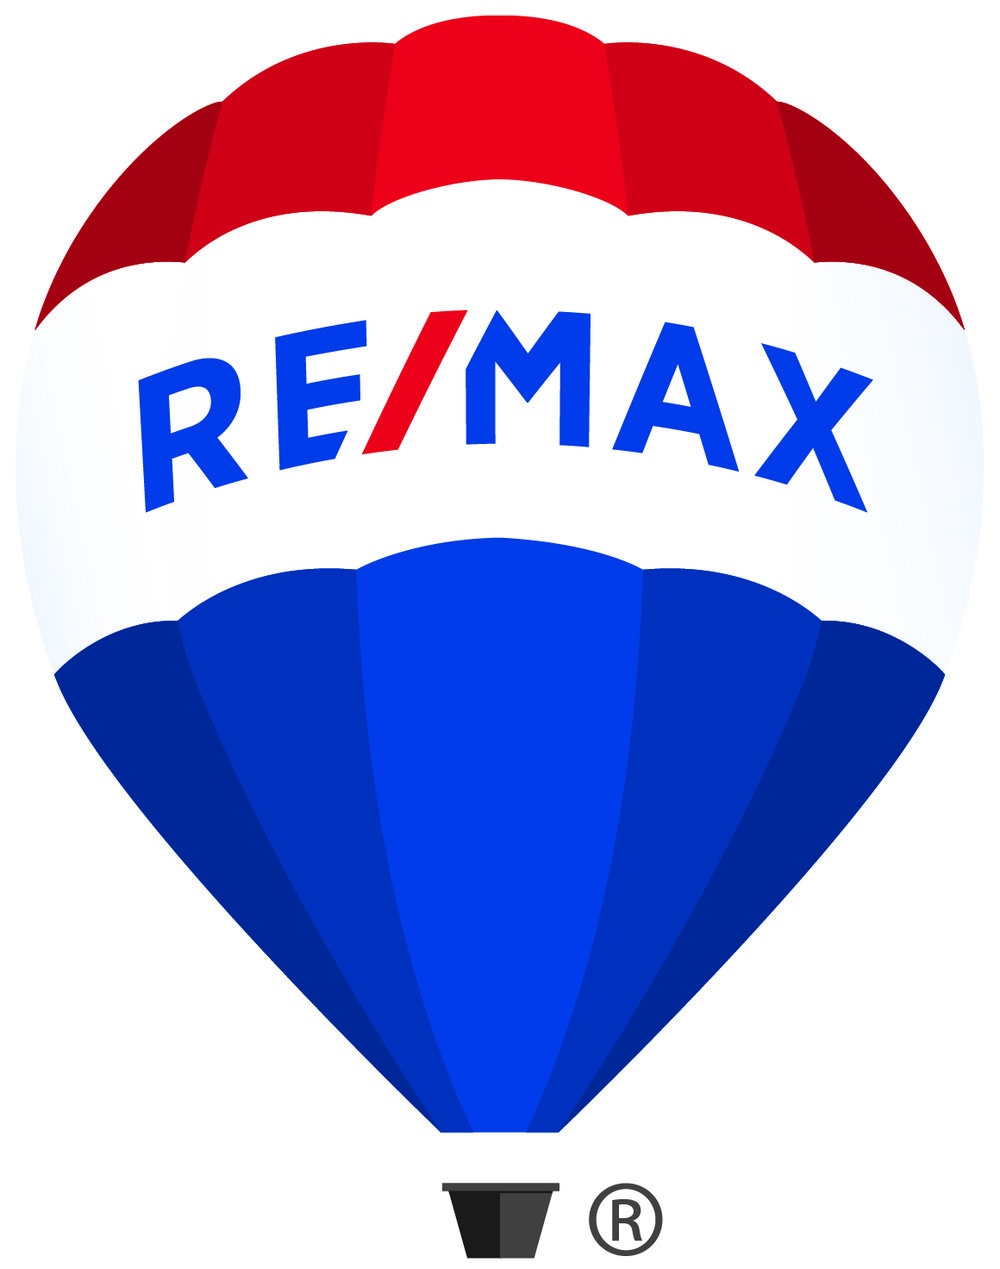 Lowen Sign Featured Catalog: REMAX image.